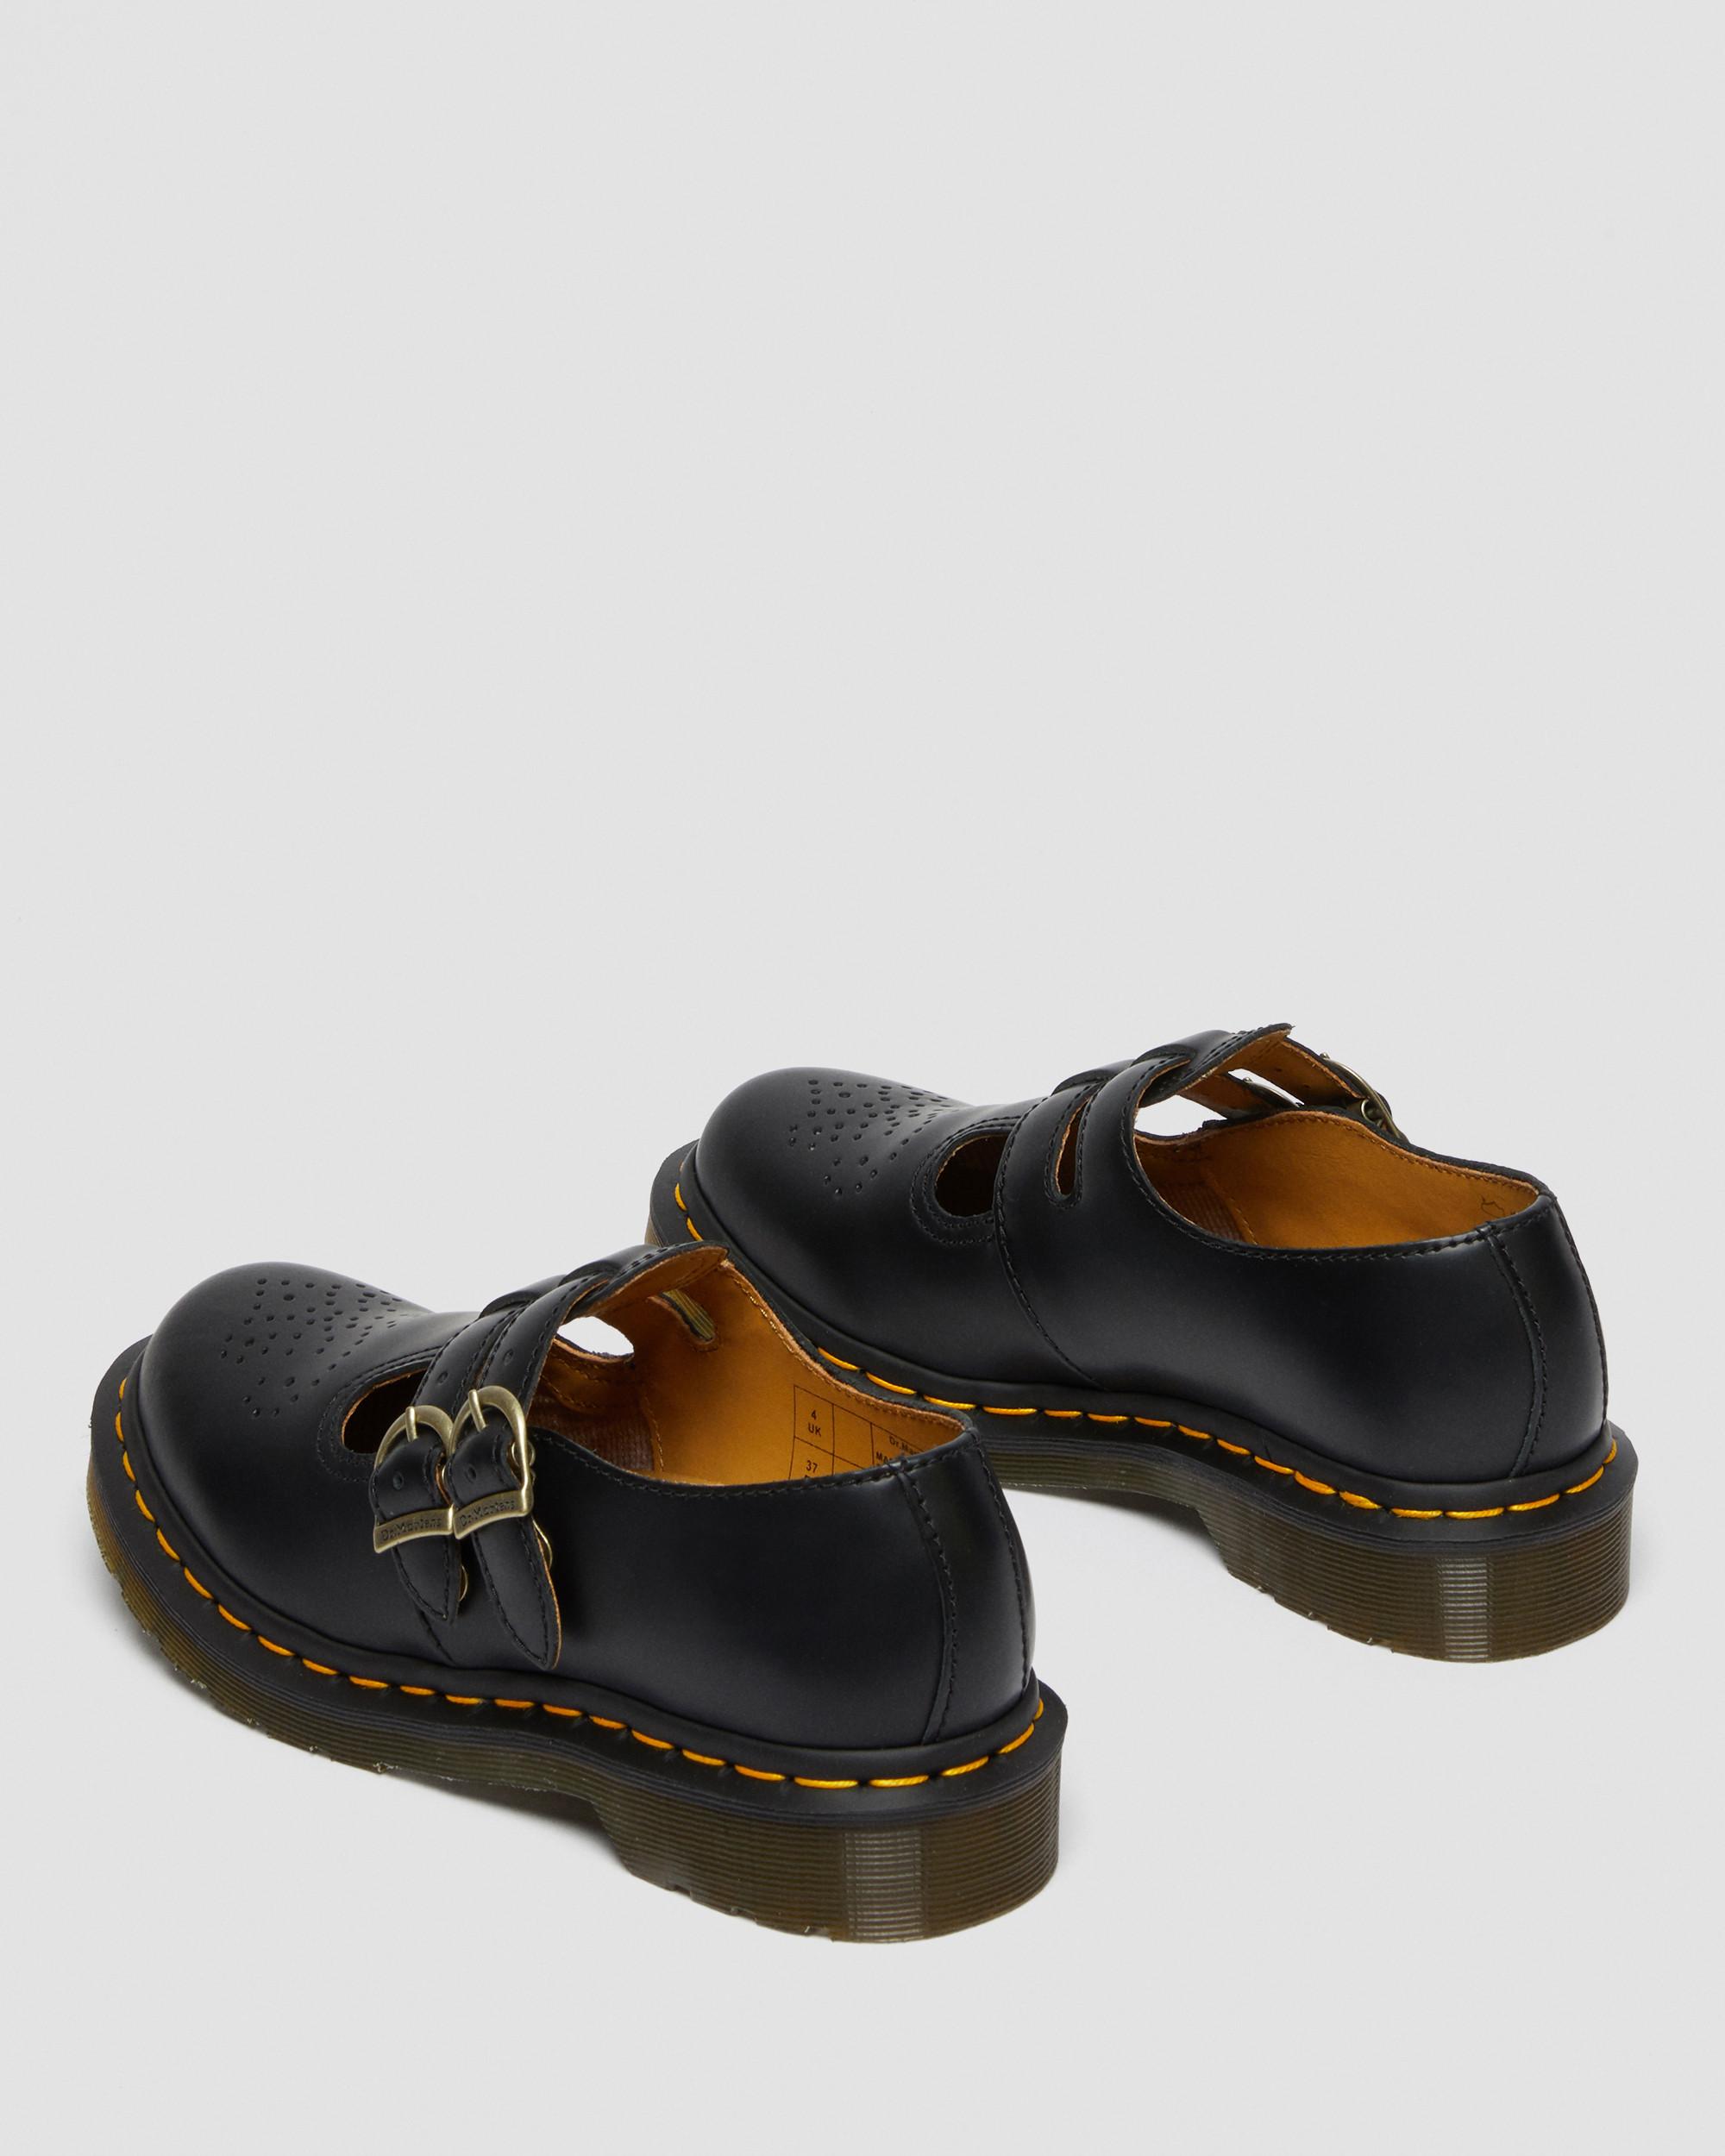 8065 Smooth Leather Mary Jane Shoes in Black | Dr. Martens